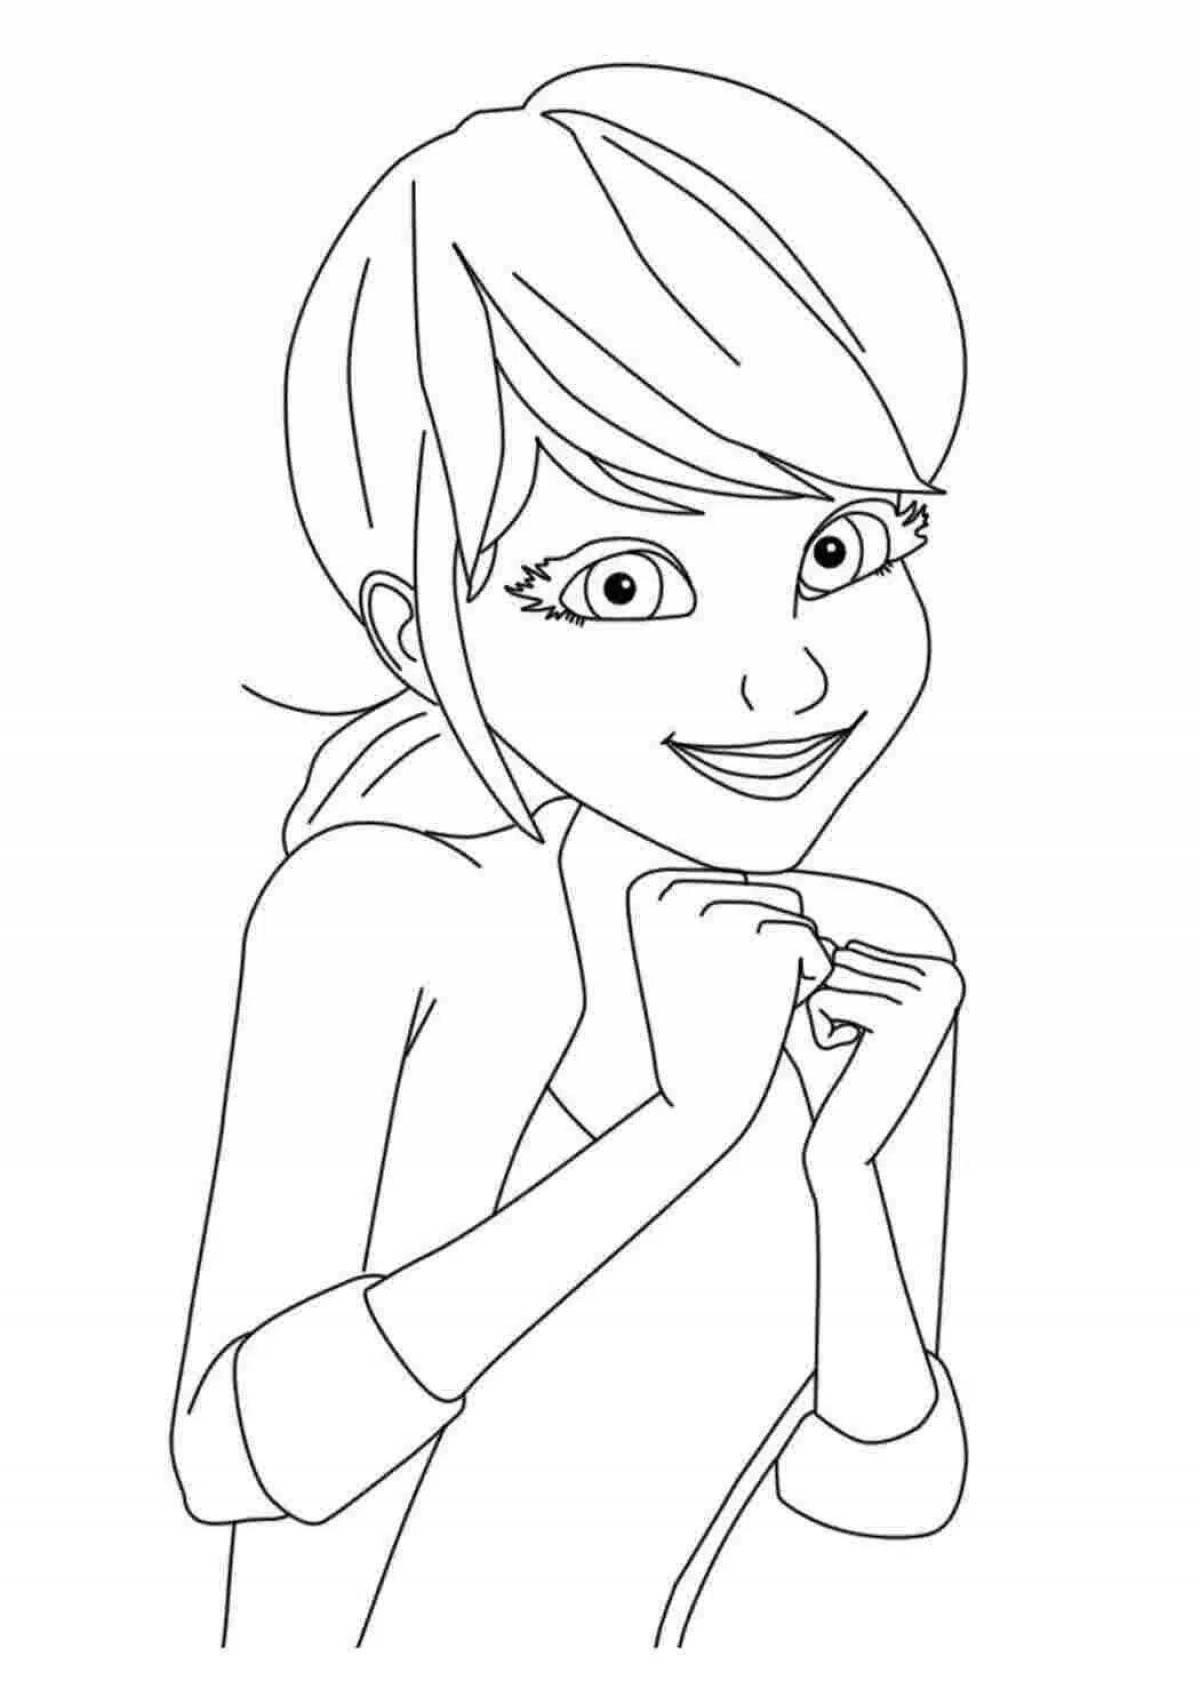 Exquisite marinette coloring book for students